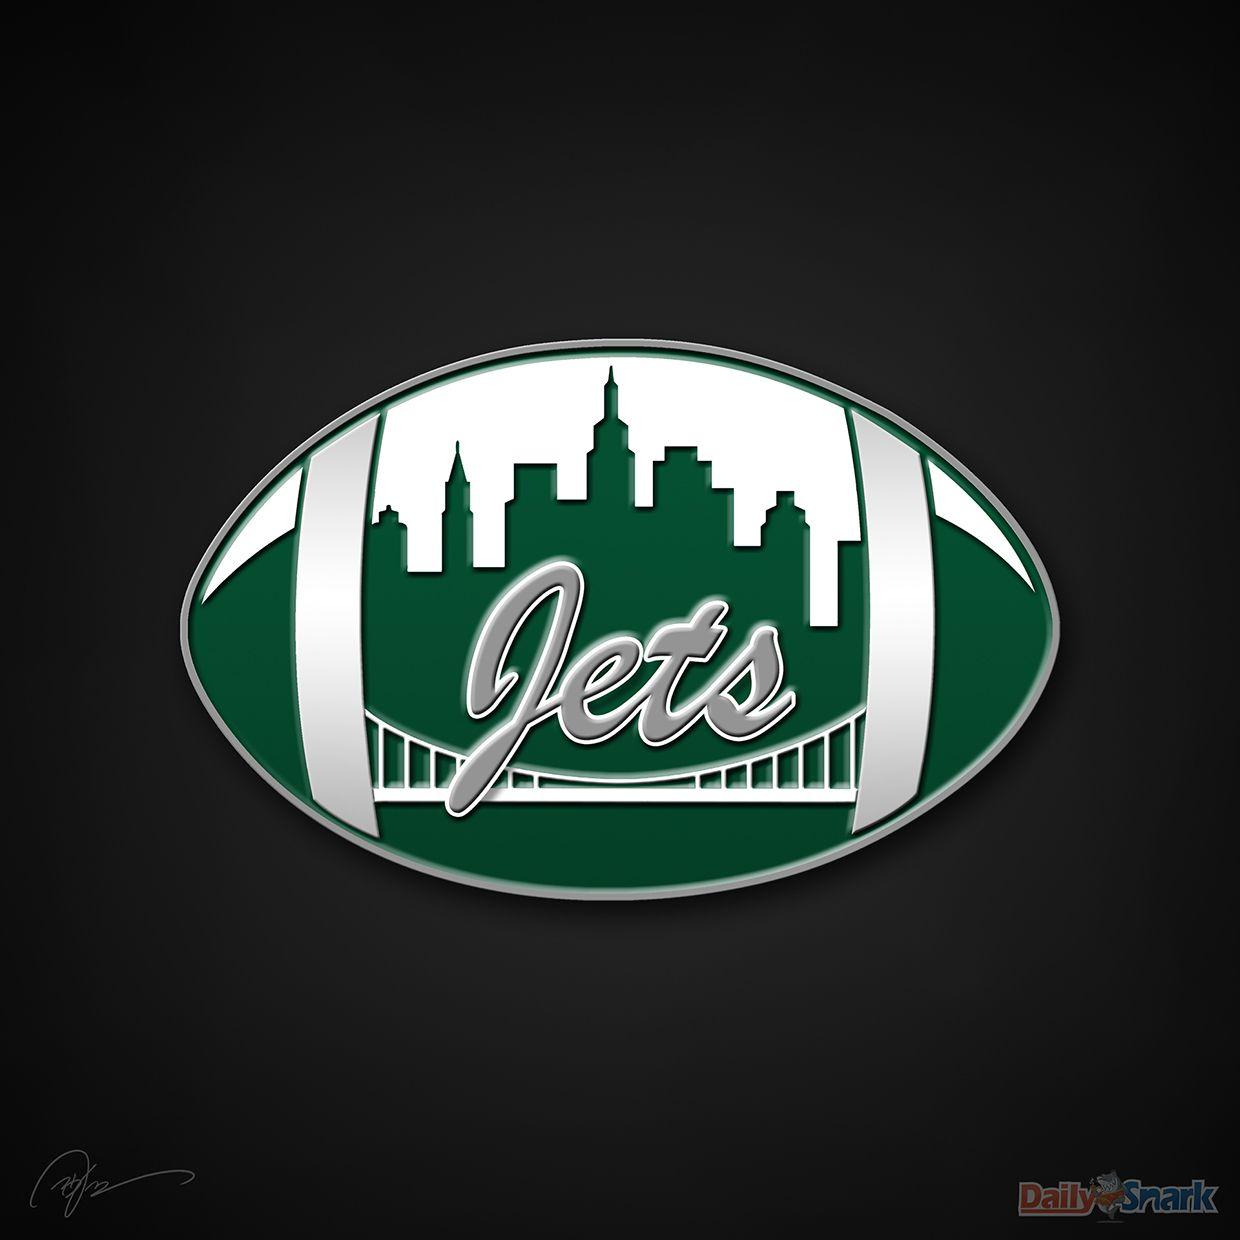 Awesome Jet Logo - new york jets awesome images - Google Search | New York Jets ...